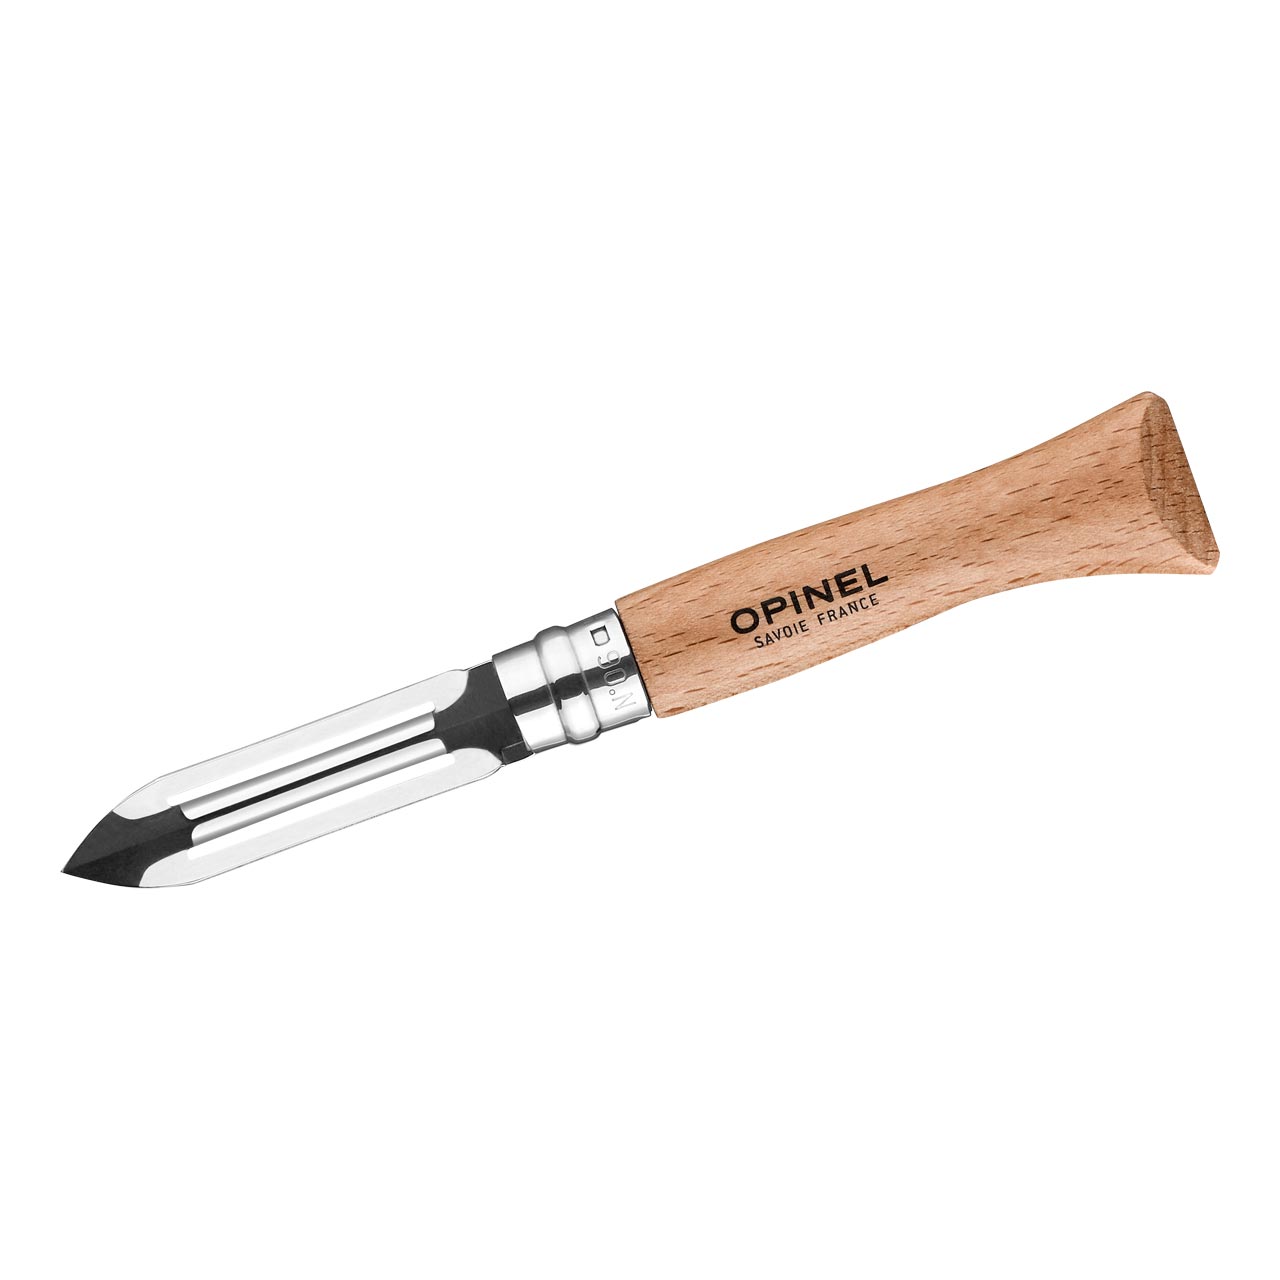 Opinel No. 6 paring knife